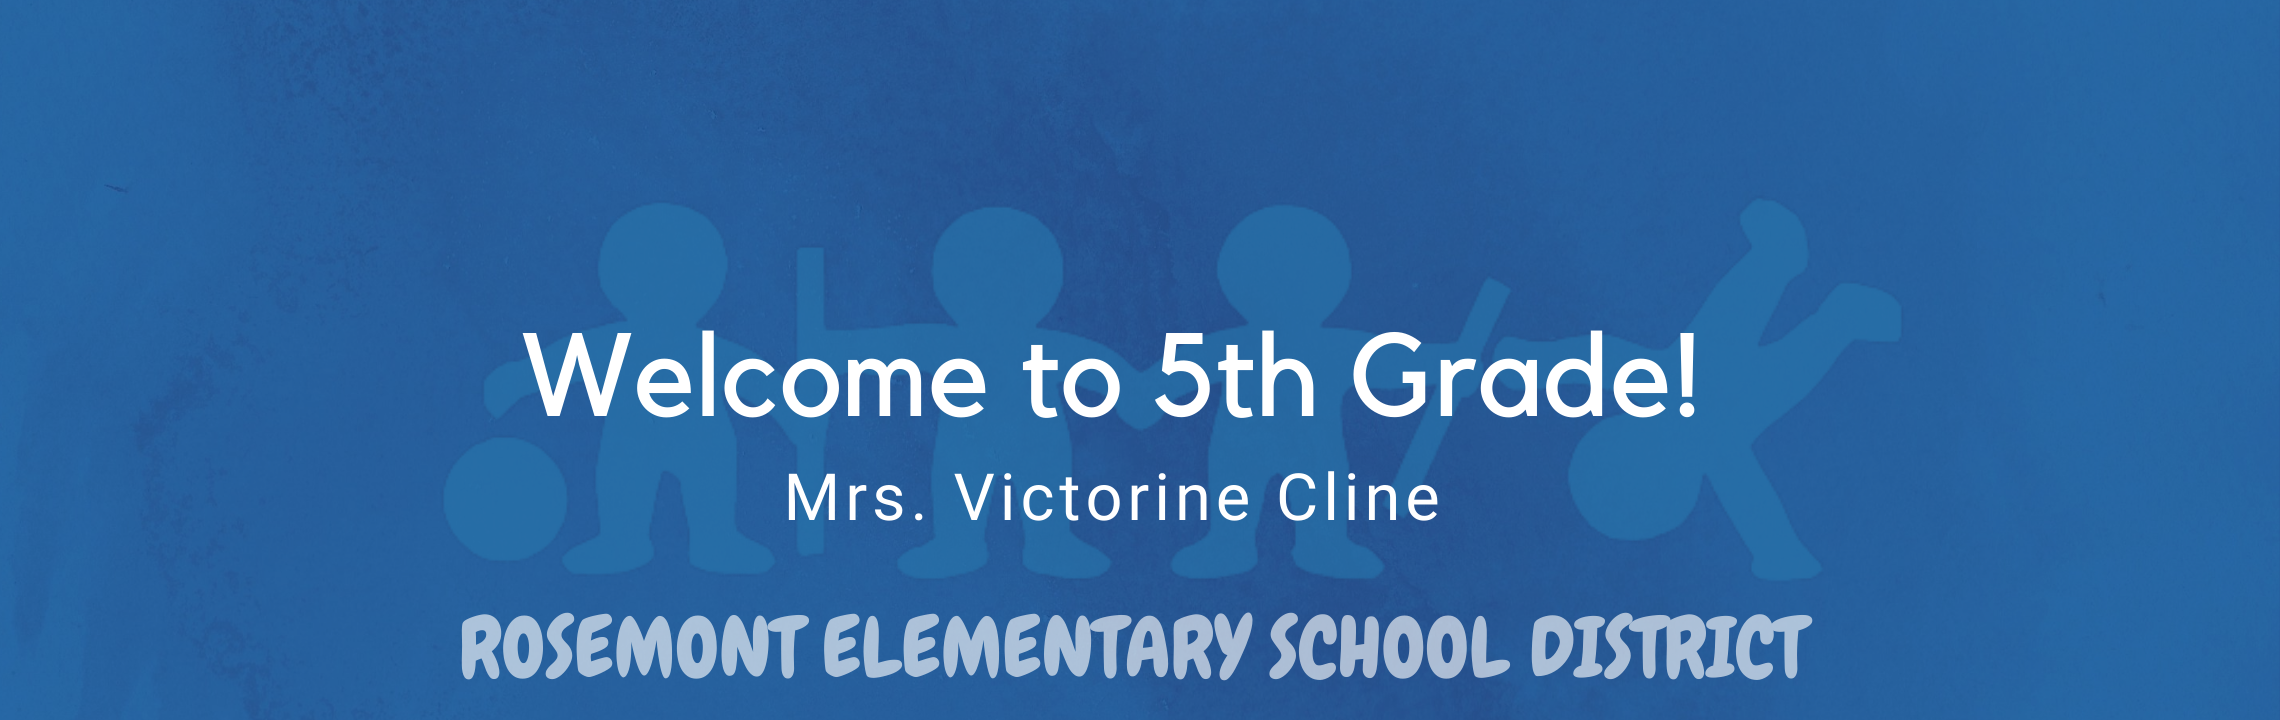 Welcome to 5th  Grade, Mrs. Victorine Cline, Rosemont Elementary Schools 